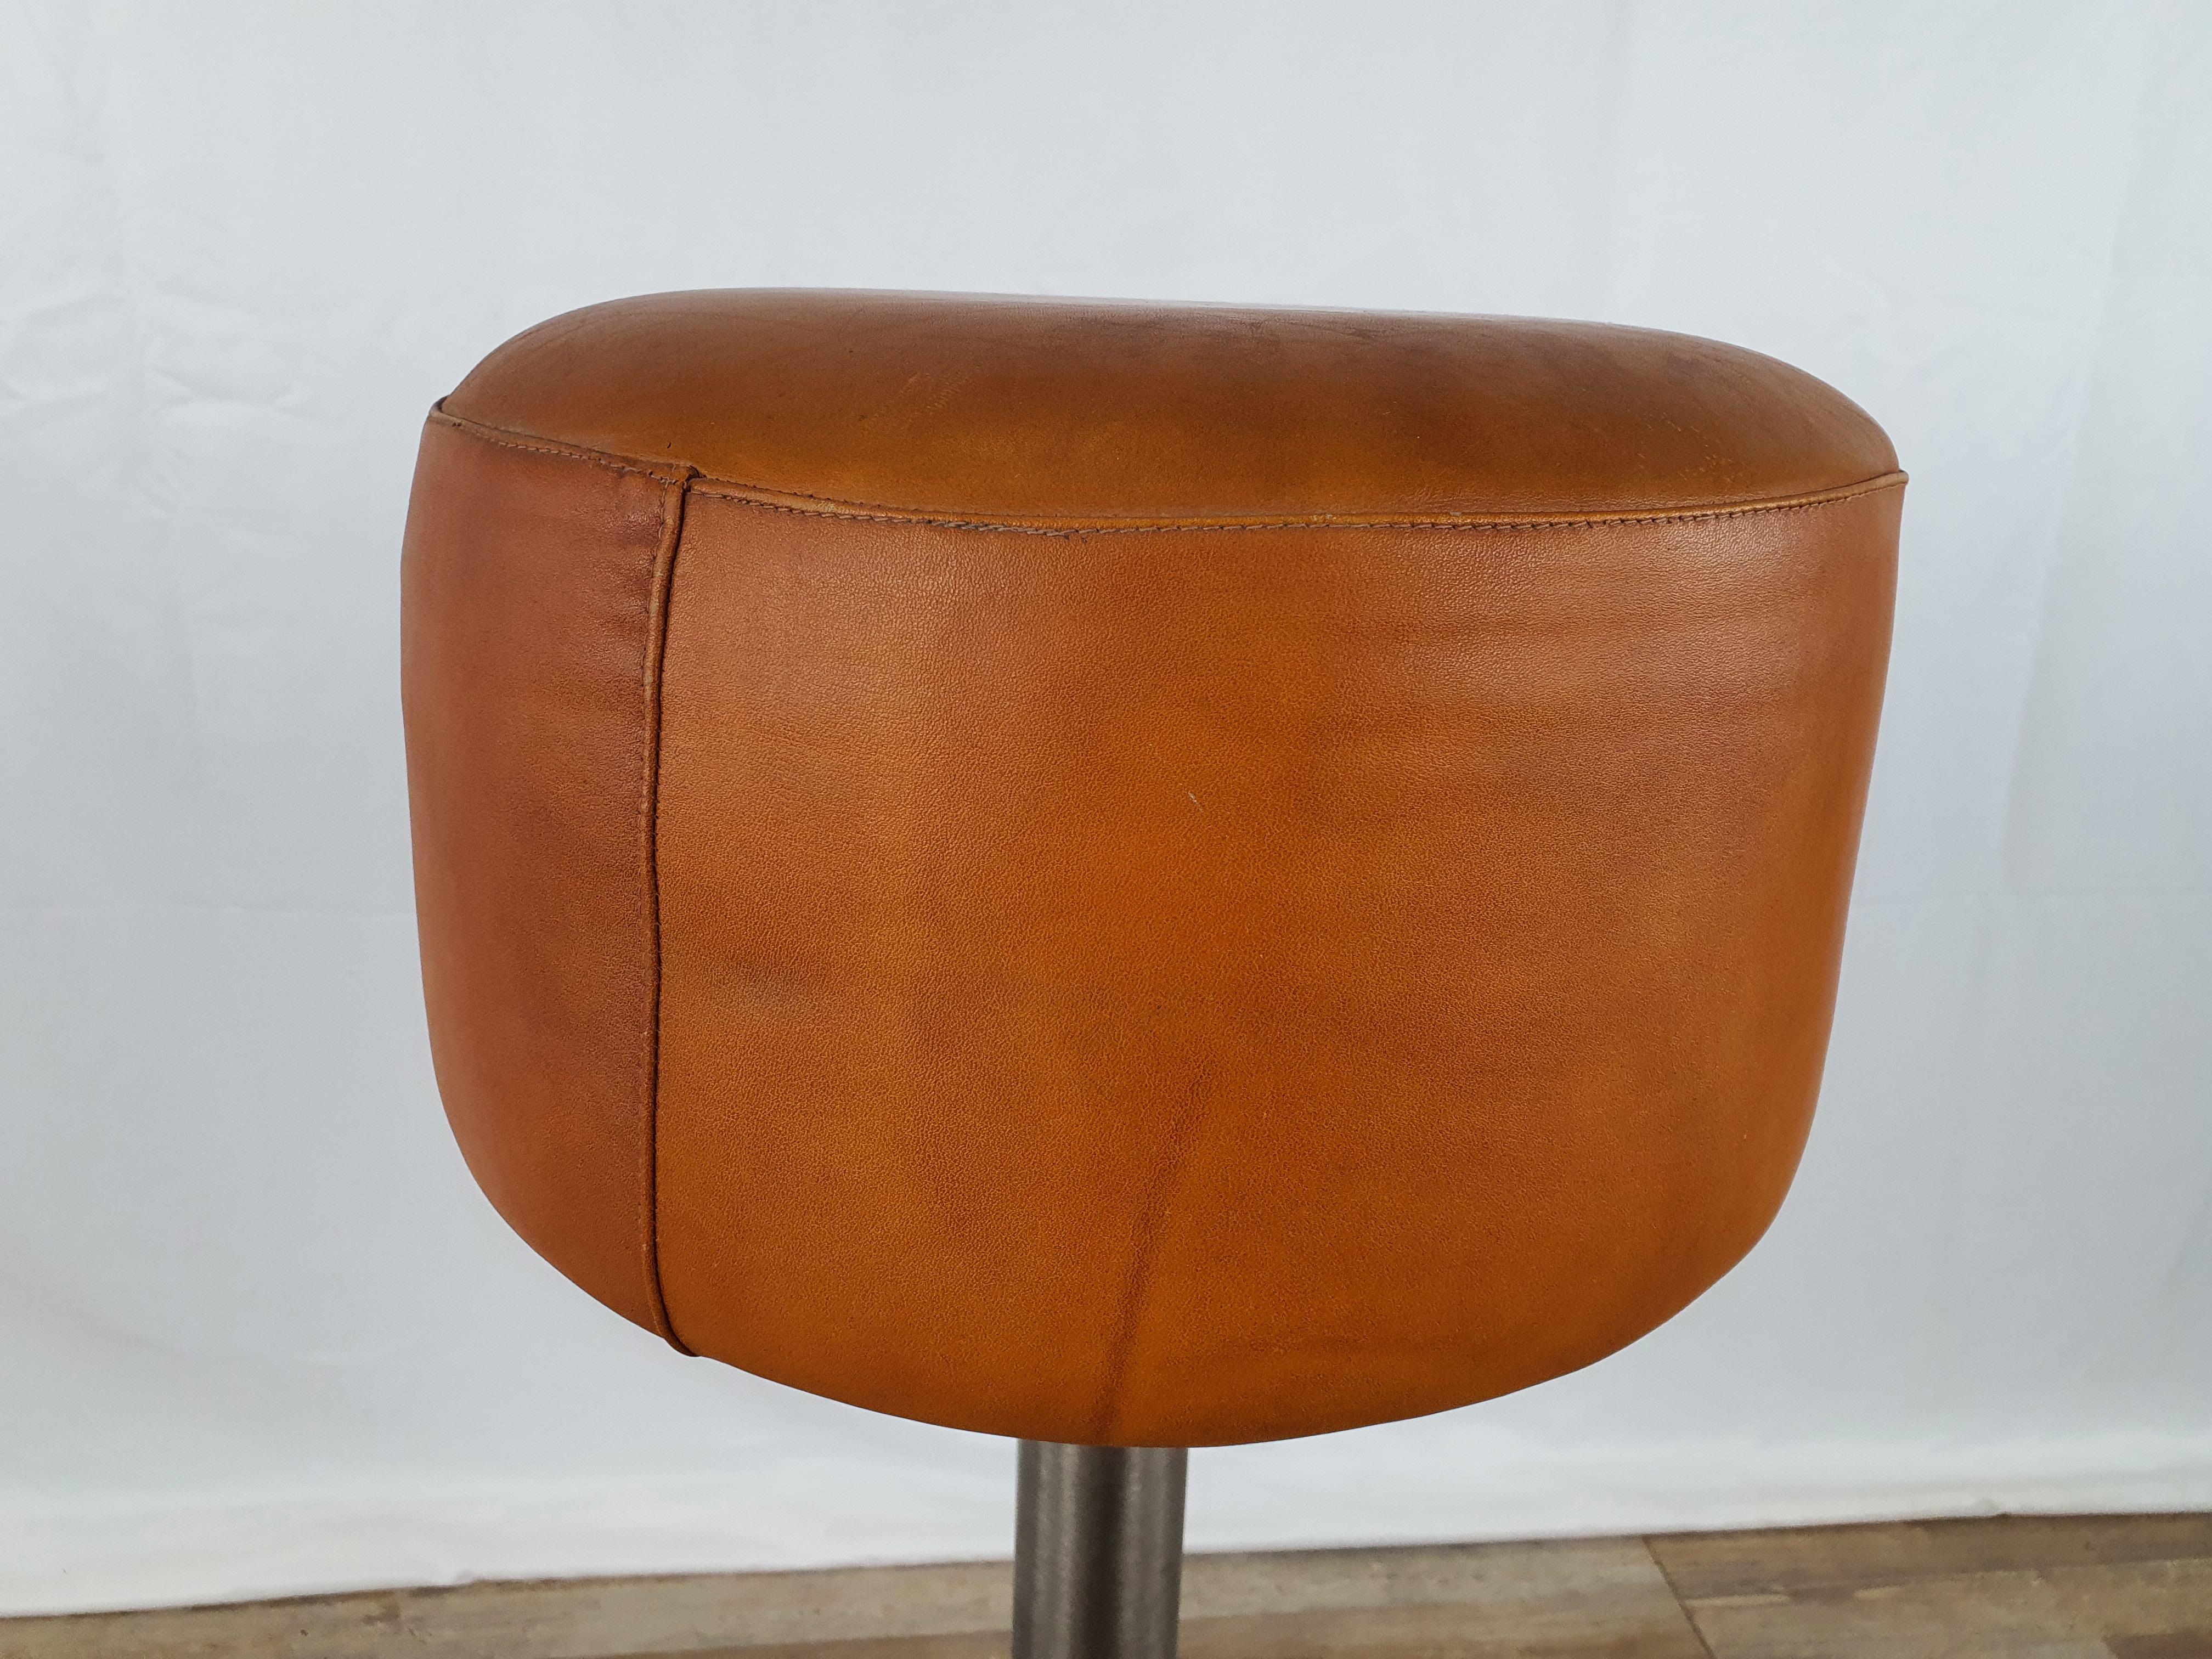 Metal stool from the early 1990s with circular seat in original orange leather and kept in perfect condition, as shown in the photos.

Very comfortable and rare to find, perfect for rooms or home kitchens with island or high dining